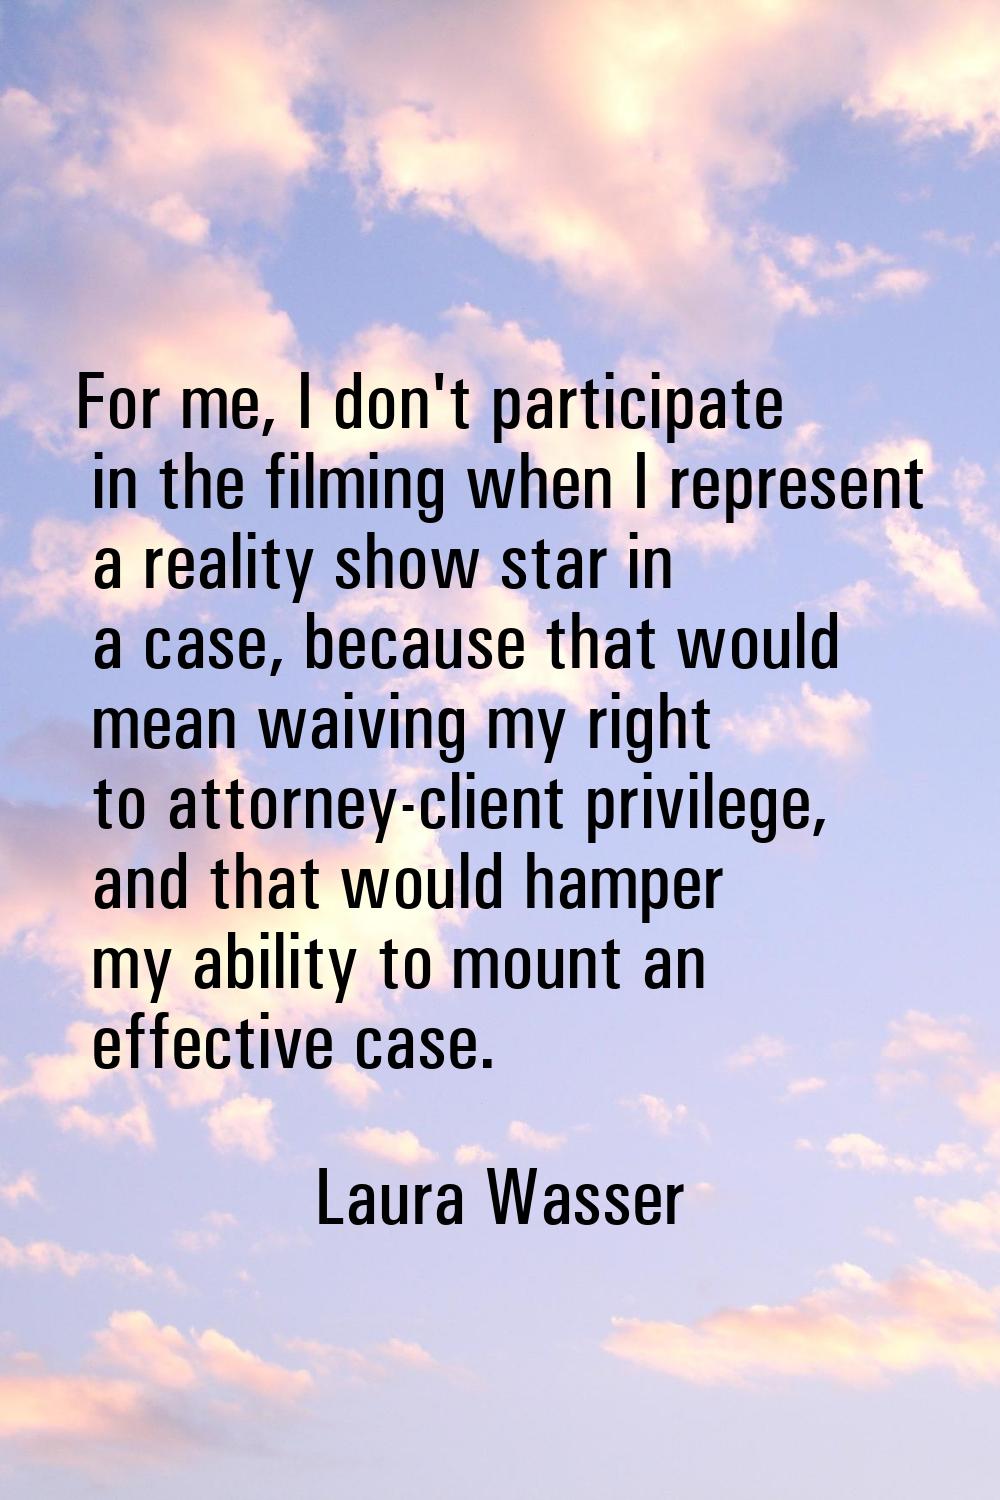 For me, I don't participate in the filming when I represent a reality show star in a case, because 